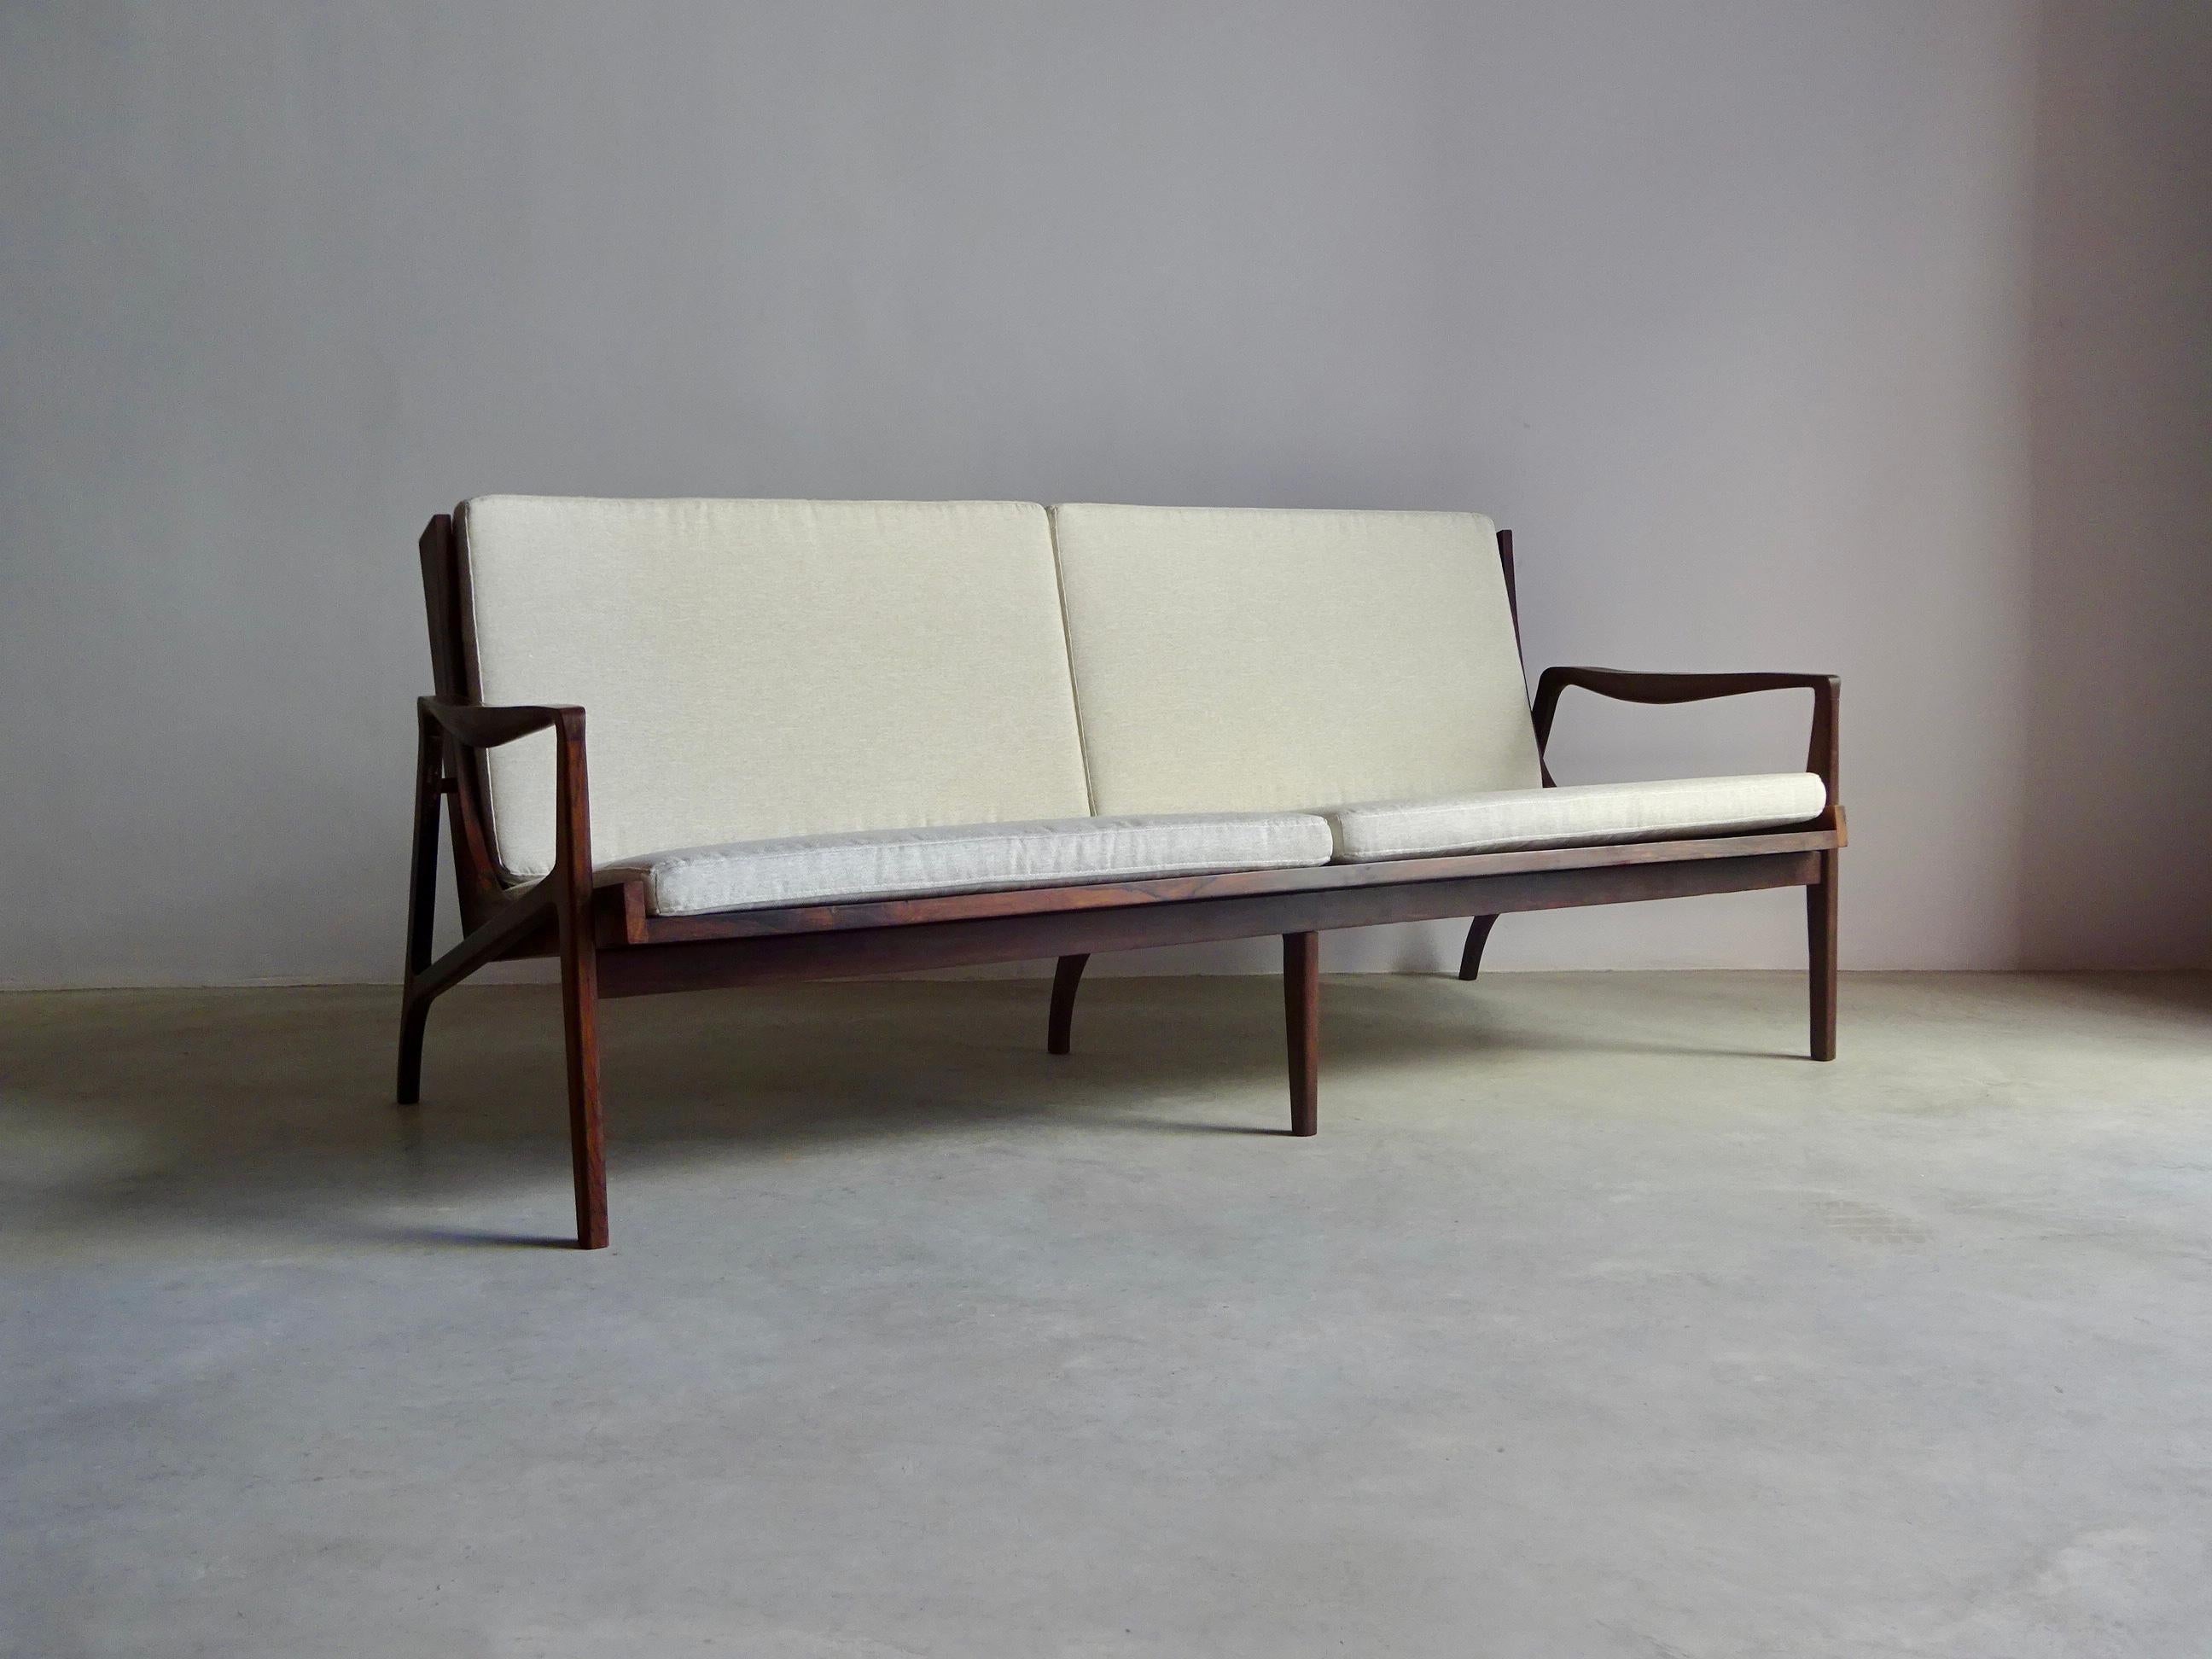 Sofa designed and produced by “Liceu de Artes e Ofícios” around 1960’s in Belo Horizonte, Brazil. Solid wood, brass details and new upholstery. Ready to use.